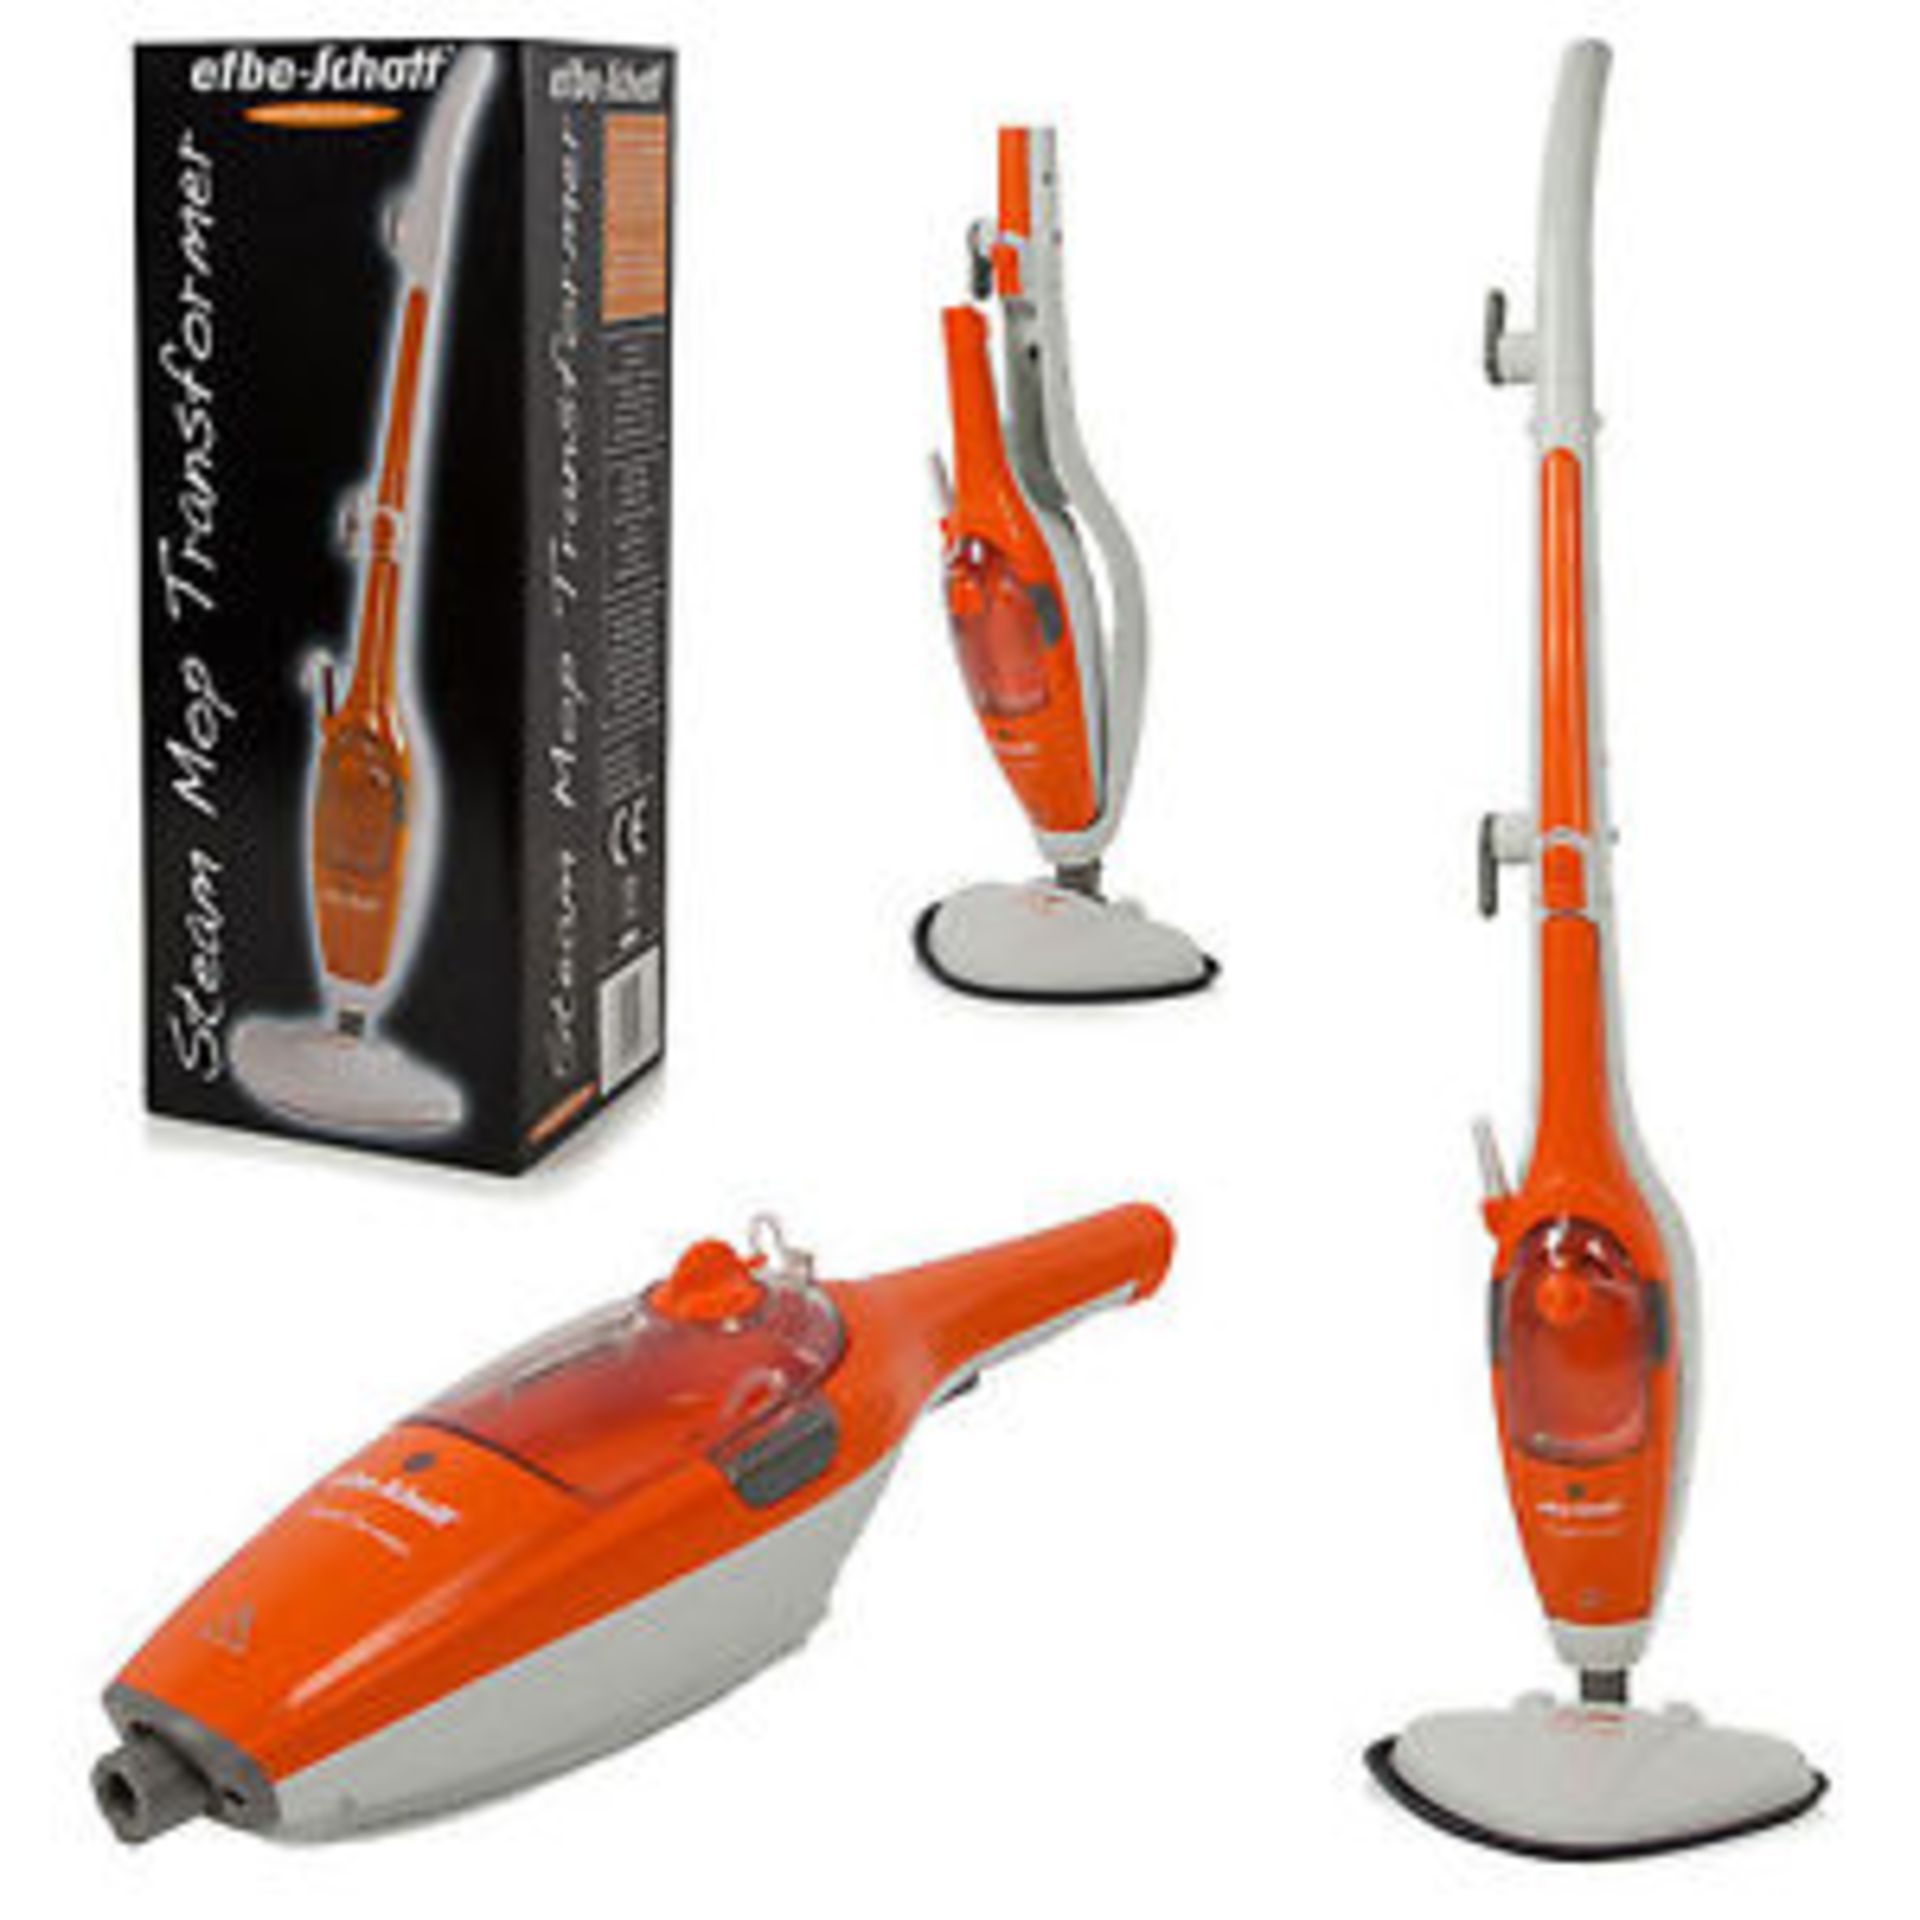 V EFBE 1300watt Steam Mop (colour may vary from picture) Brand New Boxed RRP £59.99 - Image 2 of 4